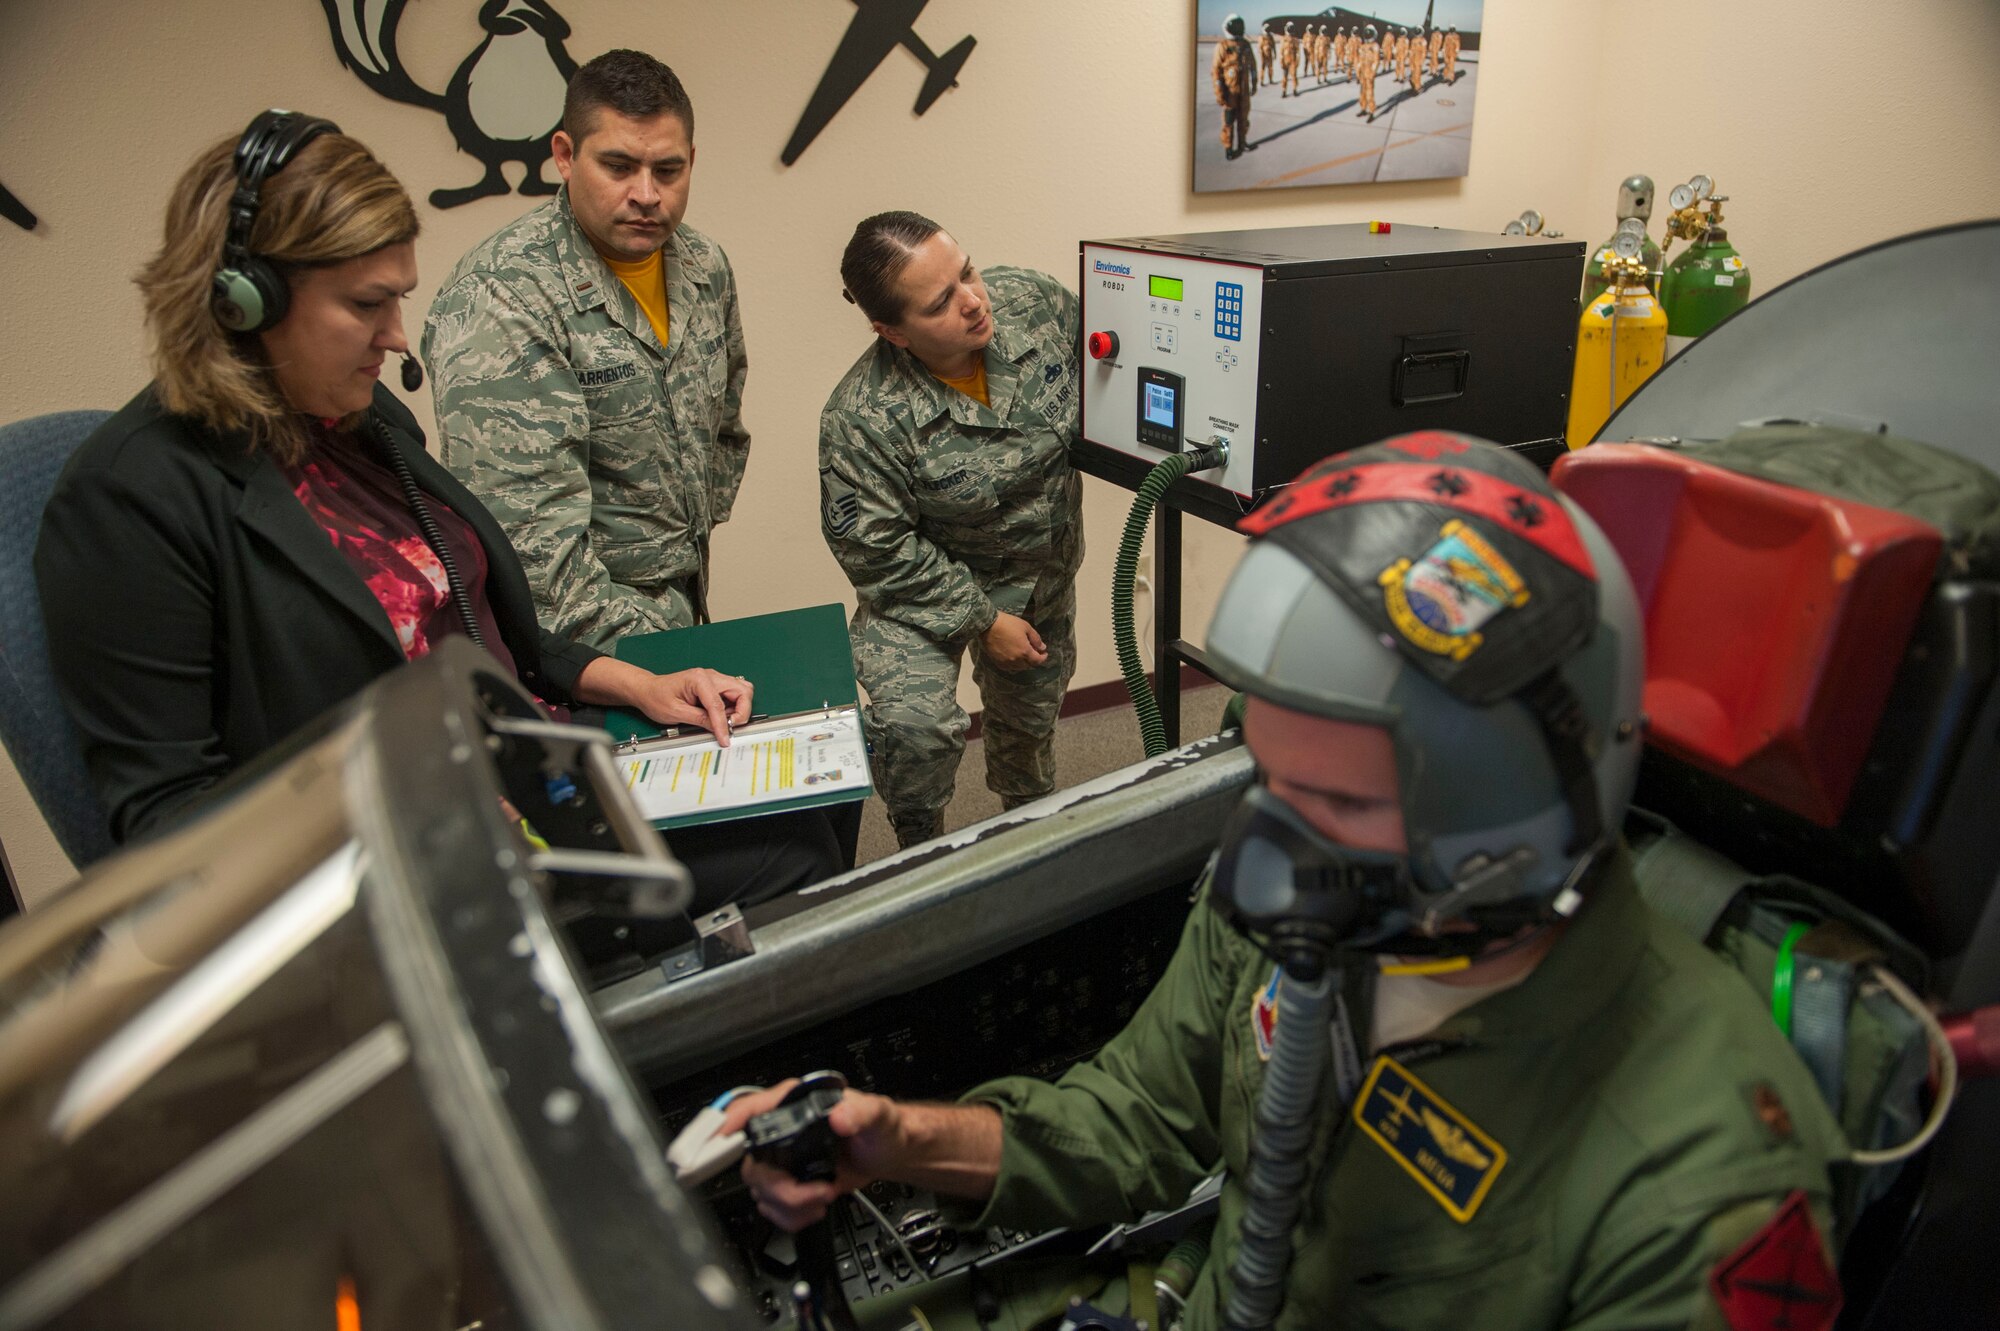 9th Physiological Support Squadron personnel monitor a pilot's vitals and cognitive abilities as he flies a simulated mission using the Reduced Oxygen Breathing Device.